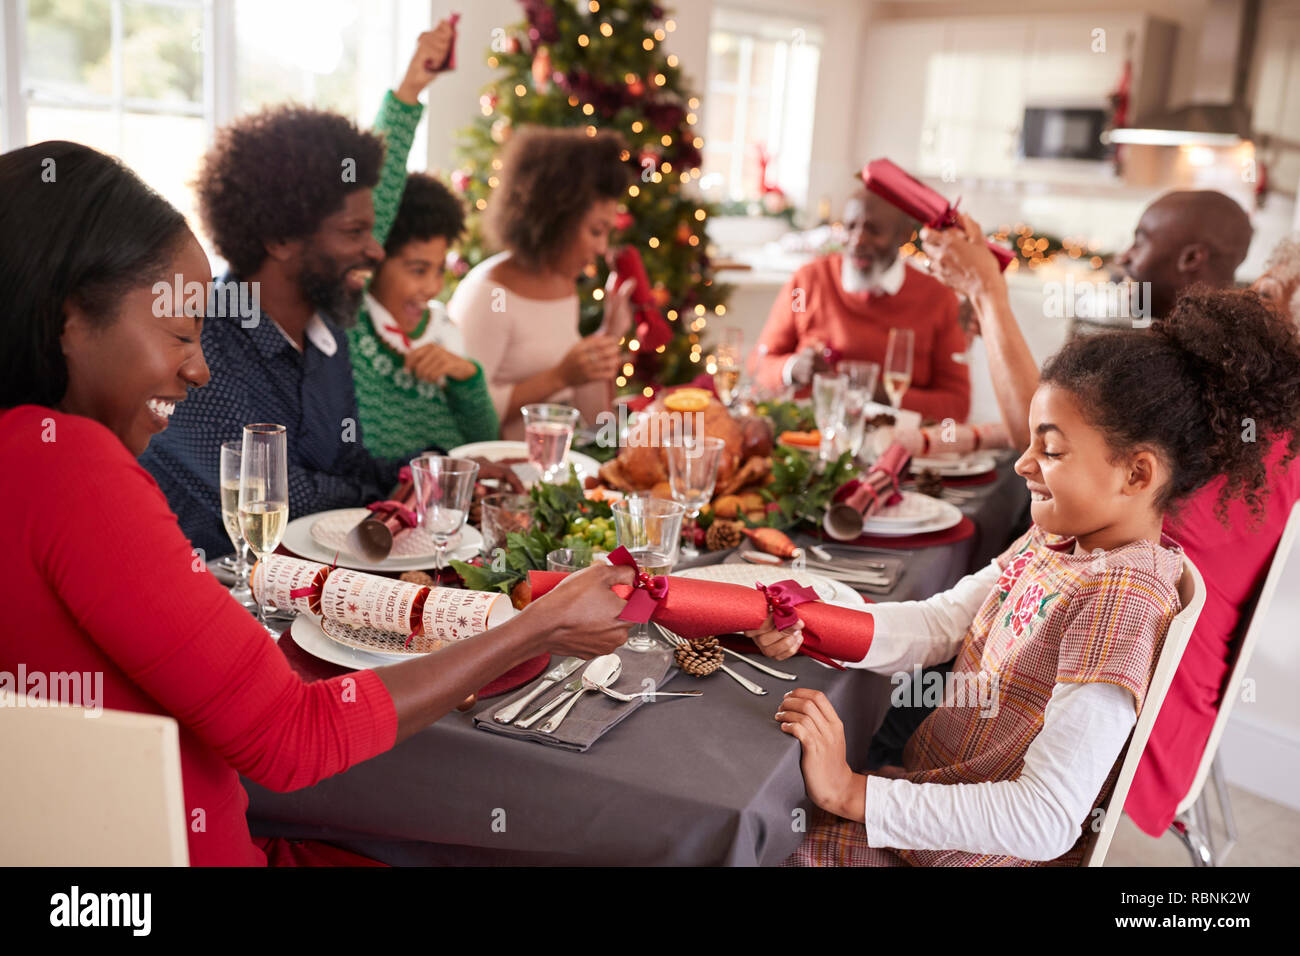 Mixed race, multi generation family having fun pulling crackers at the Christmas dinner table Stock Photo